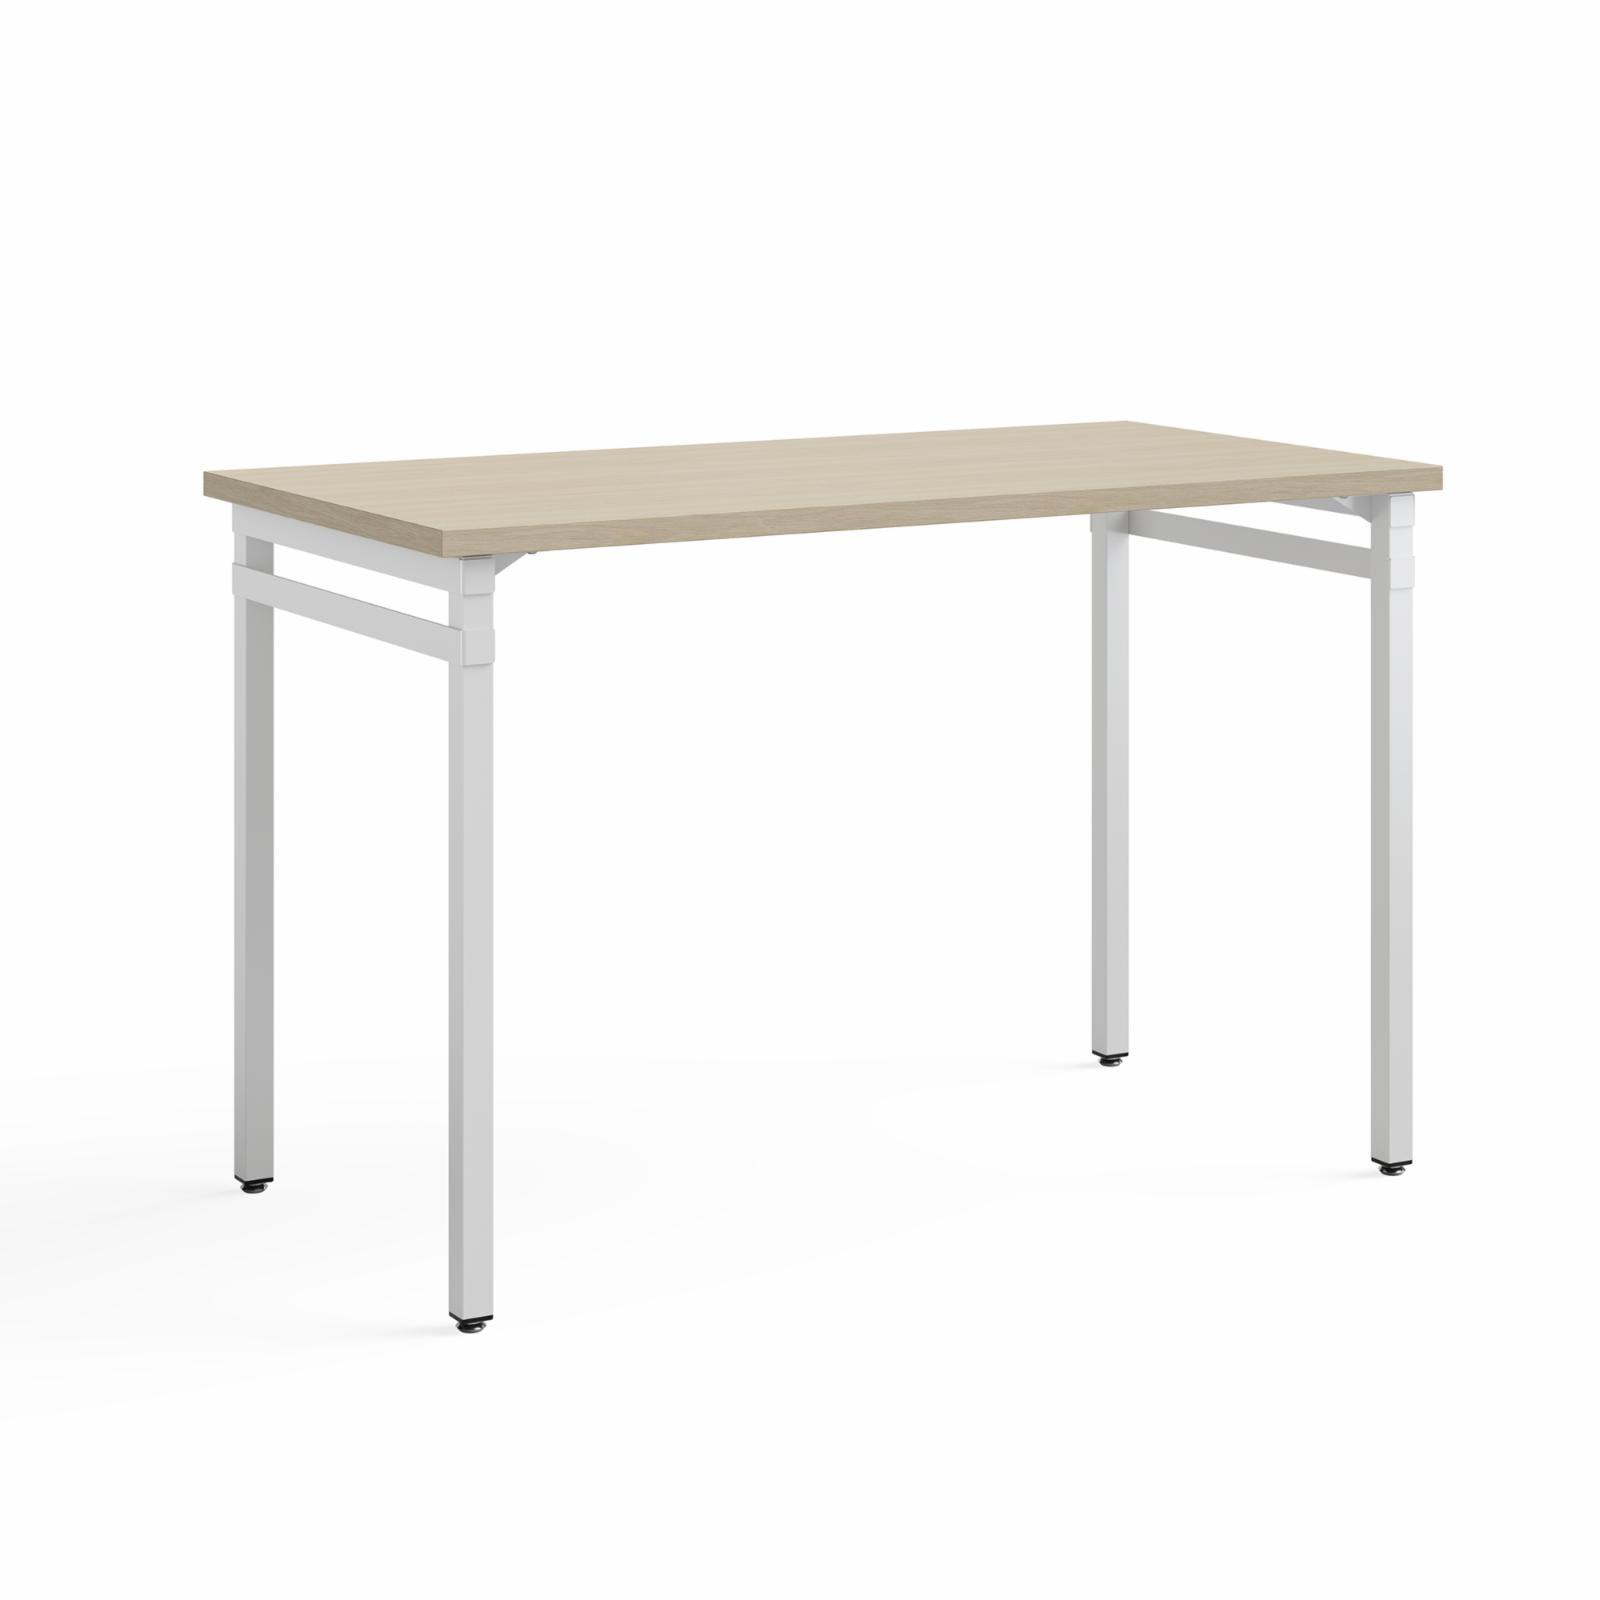 Modern White and Beige Wood Office Desk with Steel Frame